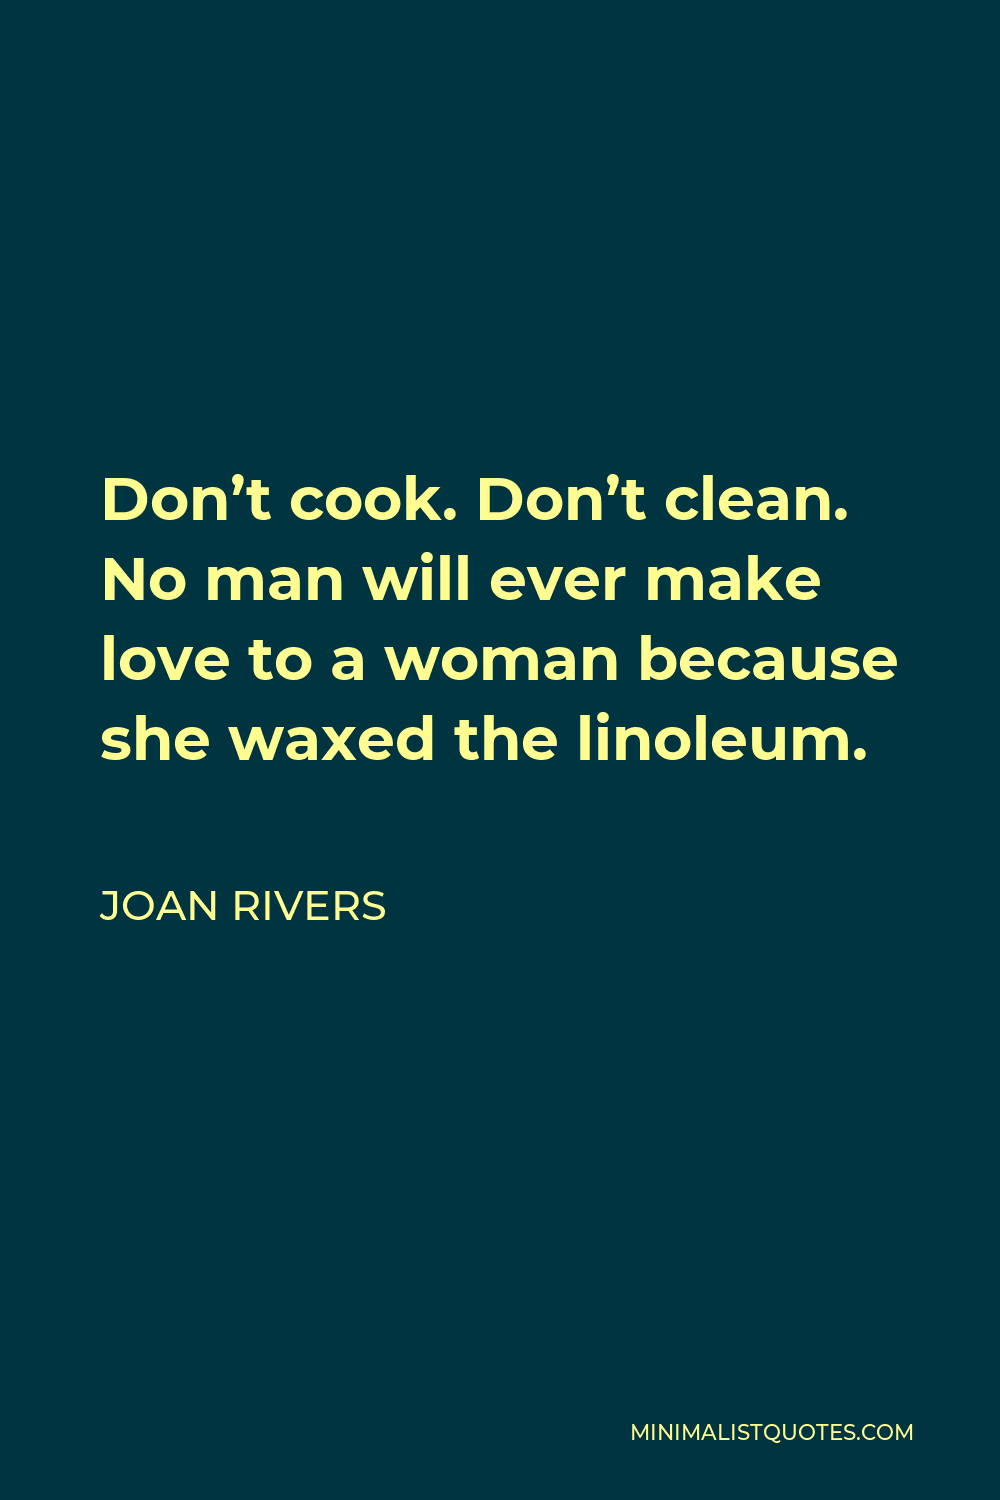 Joan Rivers Quote - Don’t cook. Don’t clean. No man will ever make love to a woman because she waxed the linoleum.